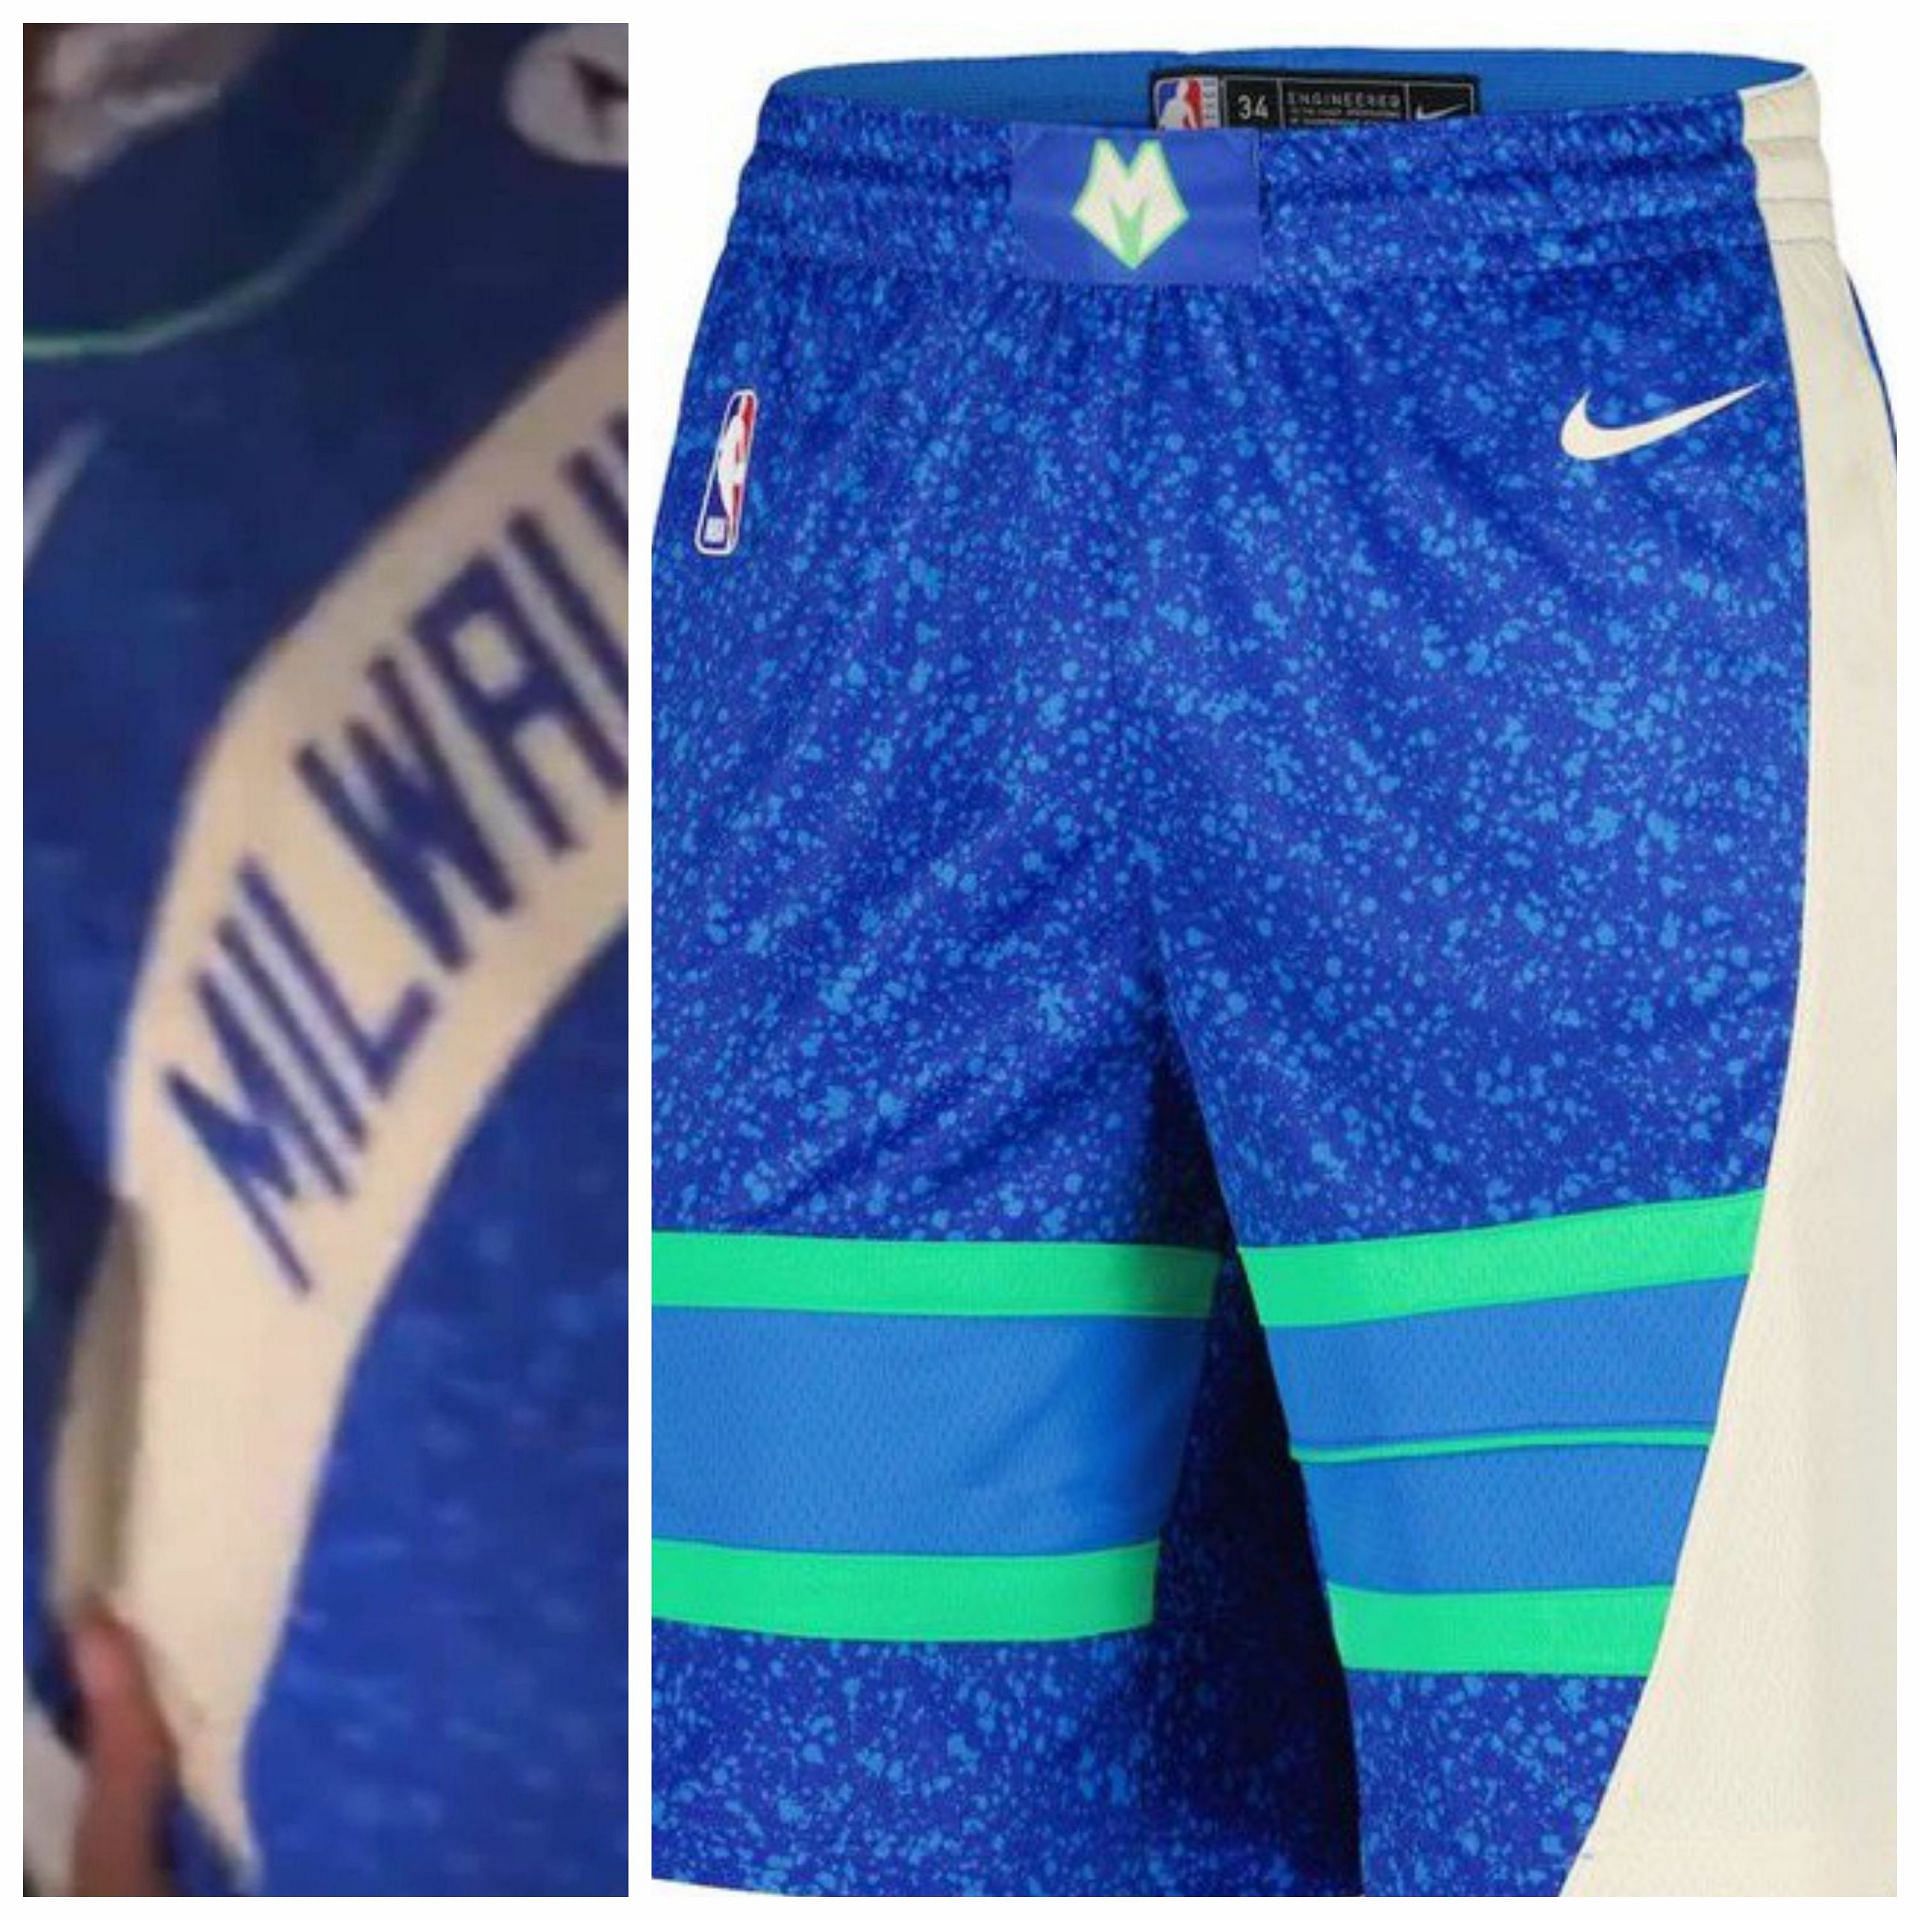 City Edition Uniforms For 2023-24 Season May Have Been Leaked